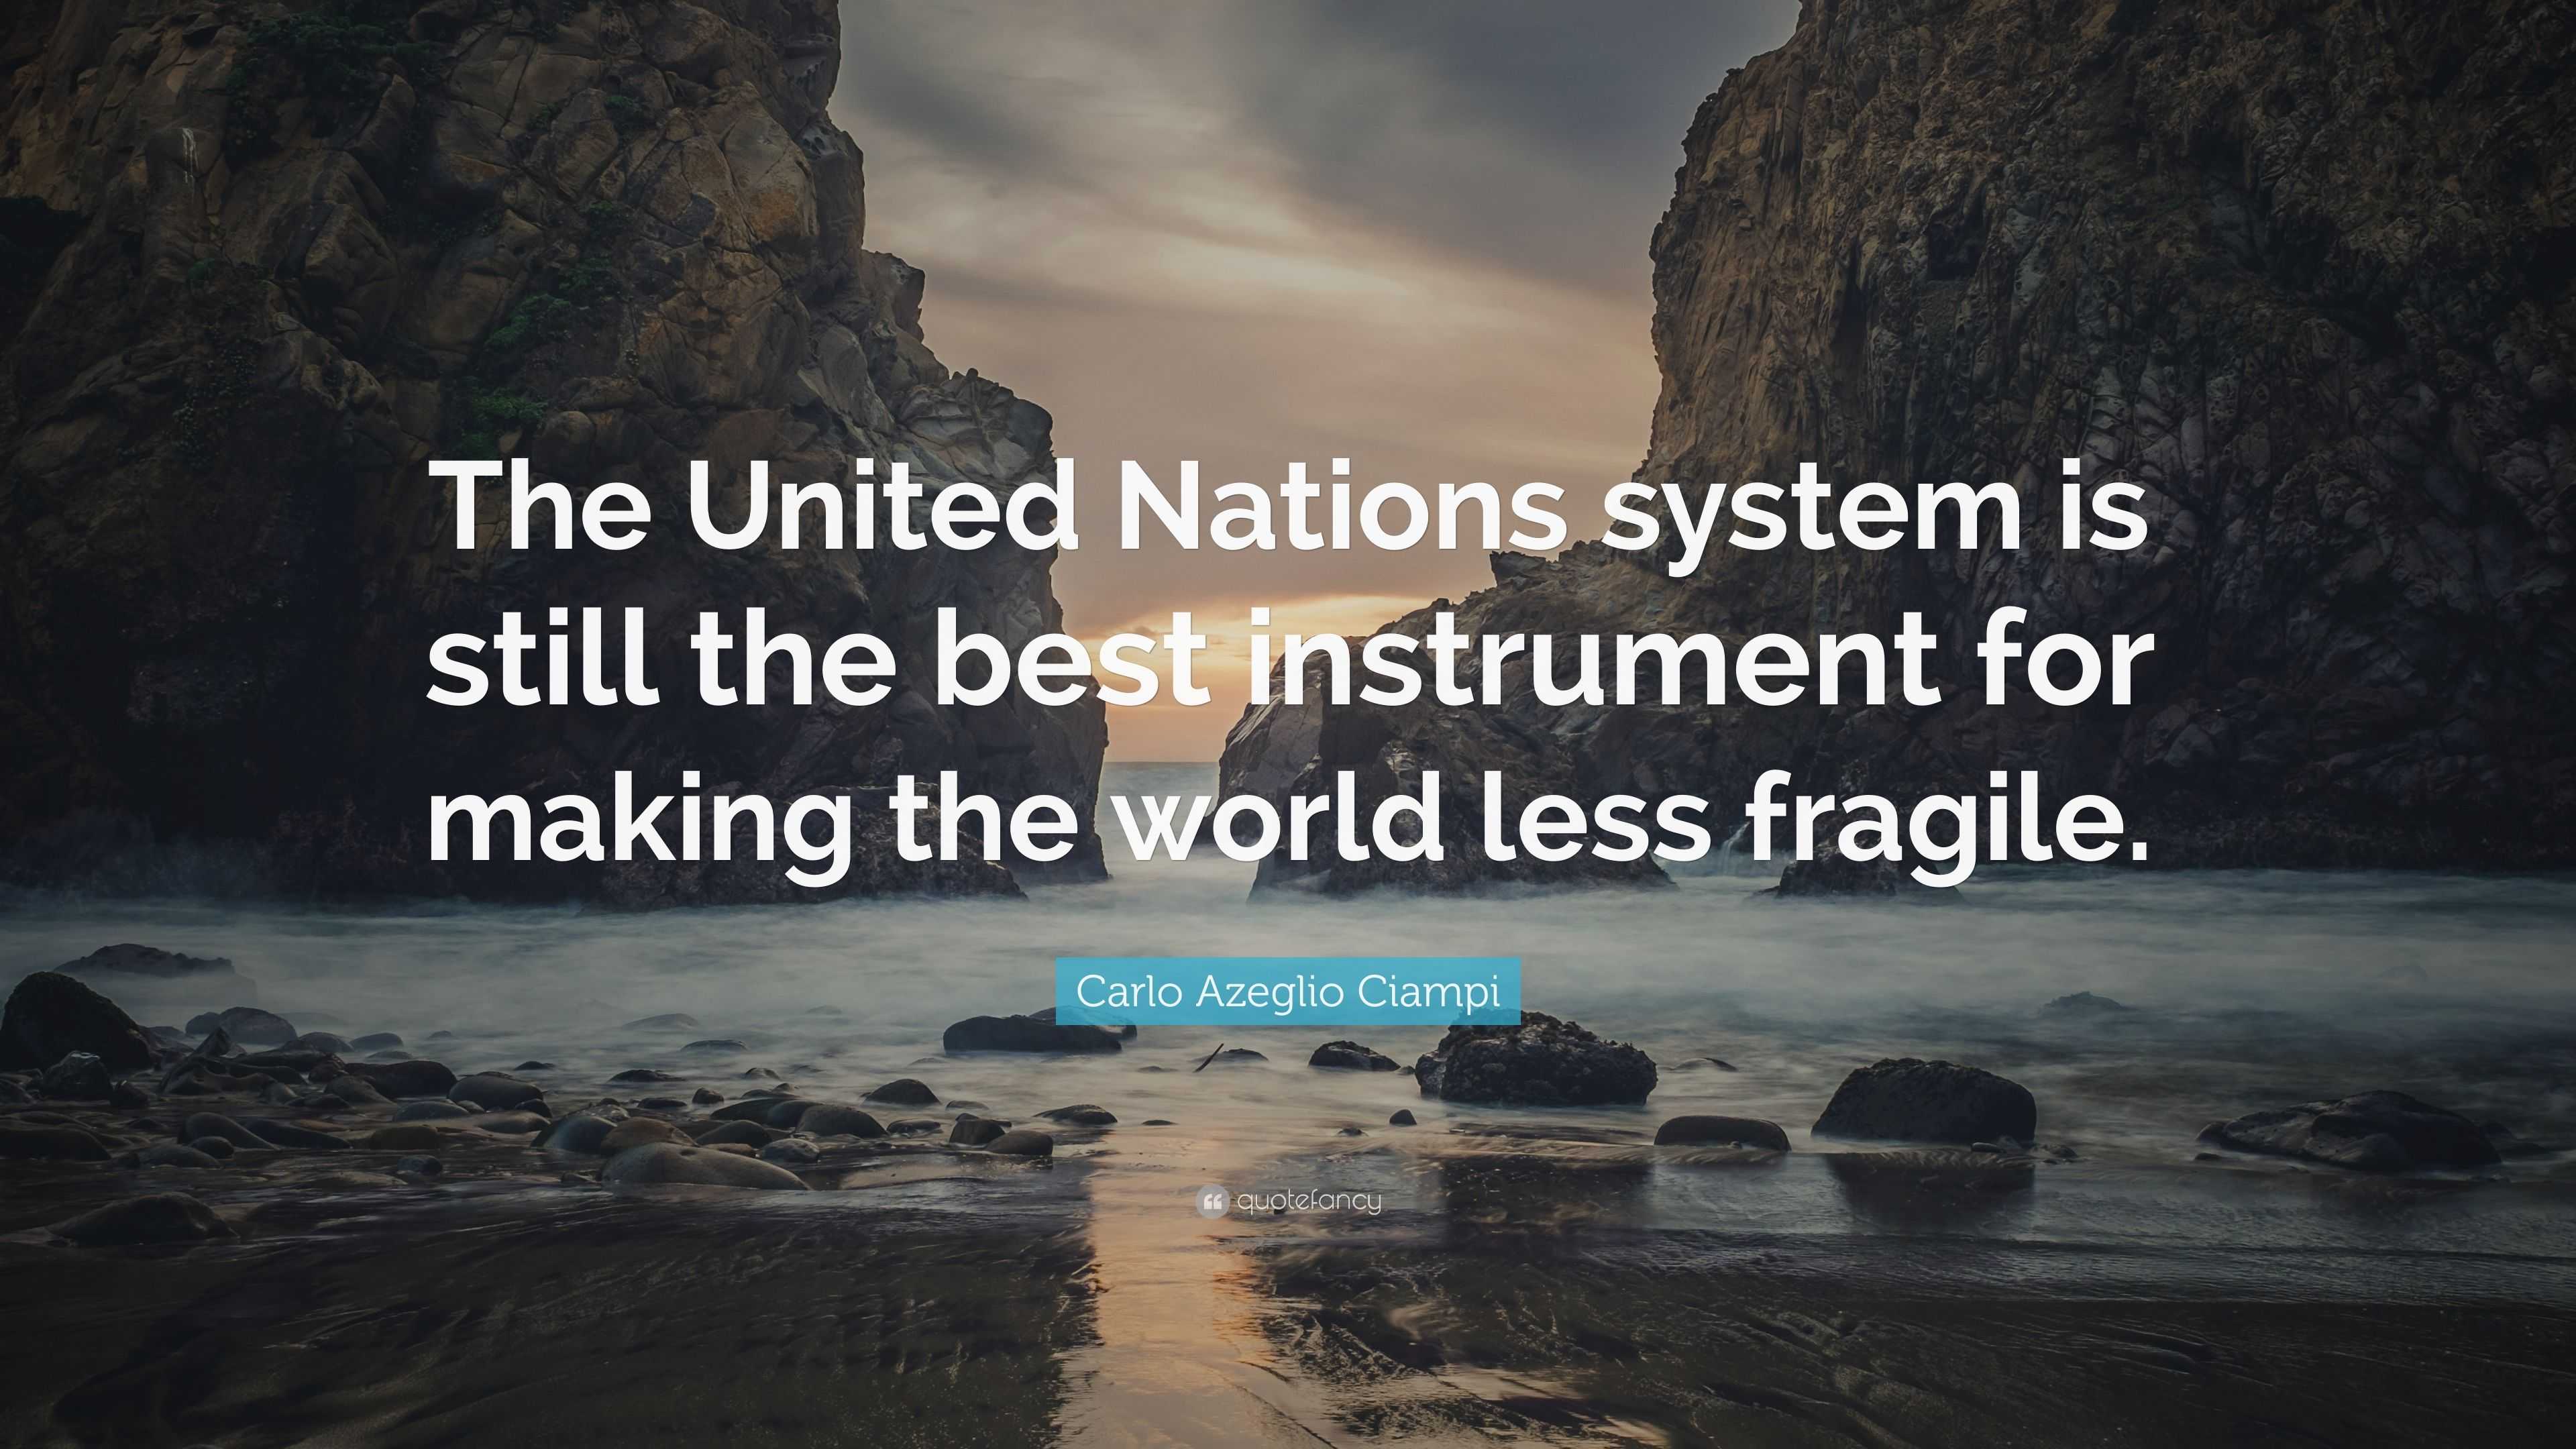 Carlo Azeglio Ciampi Quote: "The United Nations system is still the best instrument for making ...